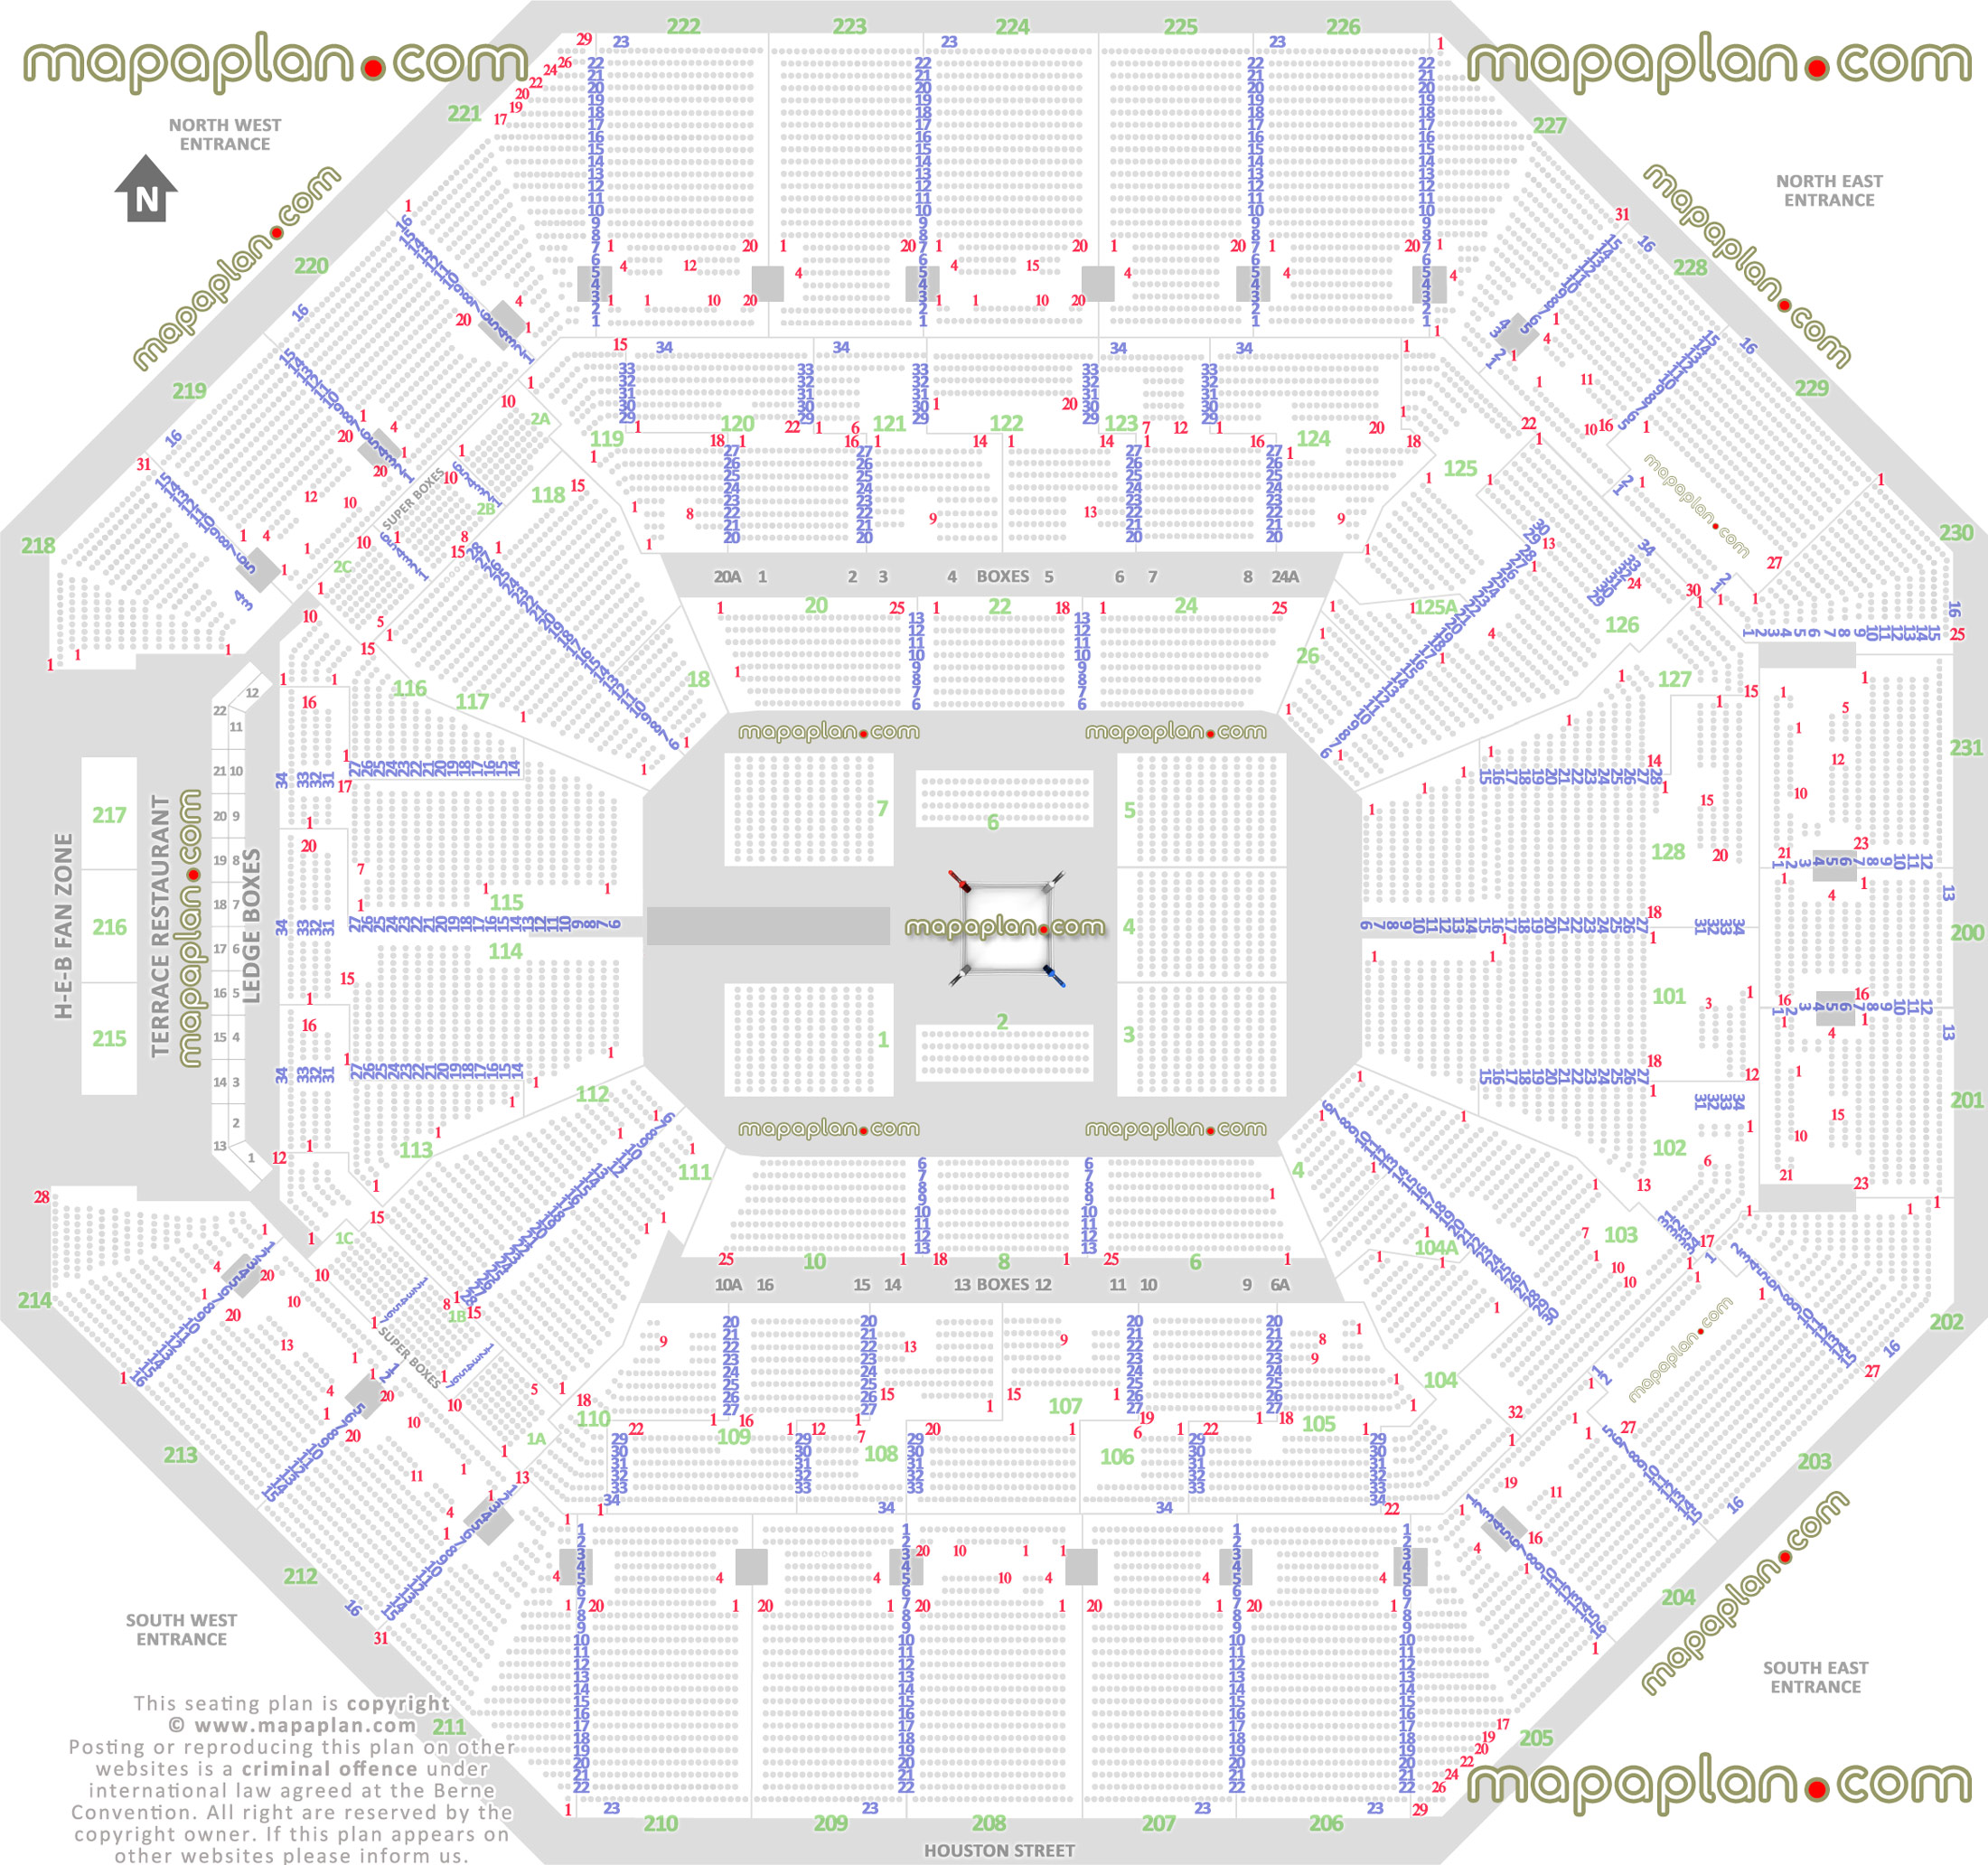 wwe wrestling boxing match events map row 360 round ring floor configuration how rows sections 101 102 103 104 104a 105 106 107 108 109 110 111 112 113 114 115 116 117 118 119 120 121 122 123 124 125 125a 126 127 128 San Antonio AT&T Center seating chart